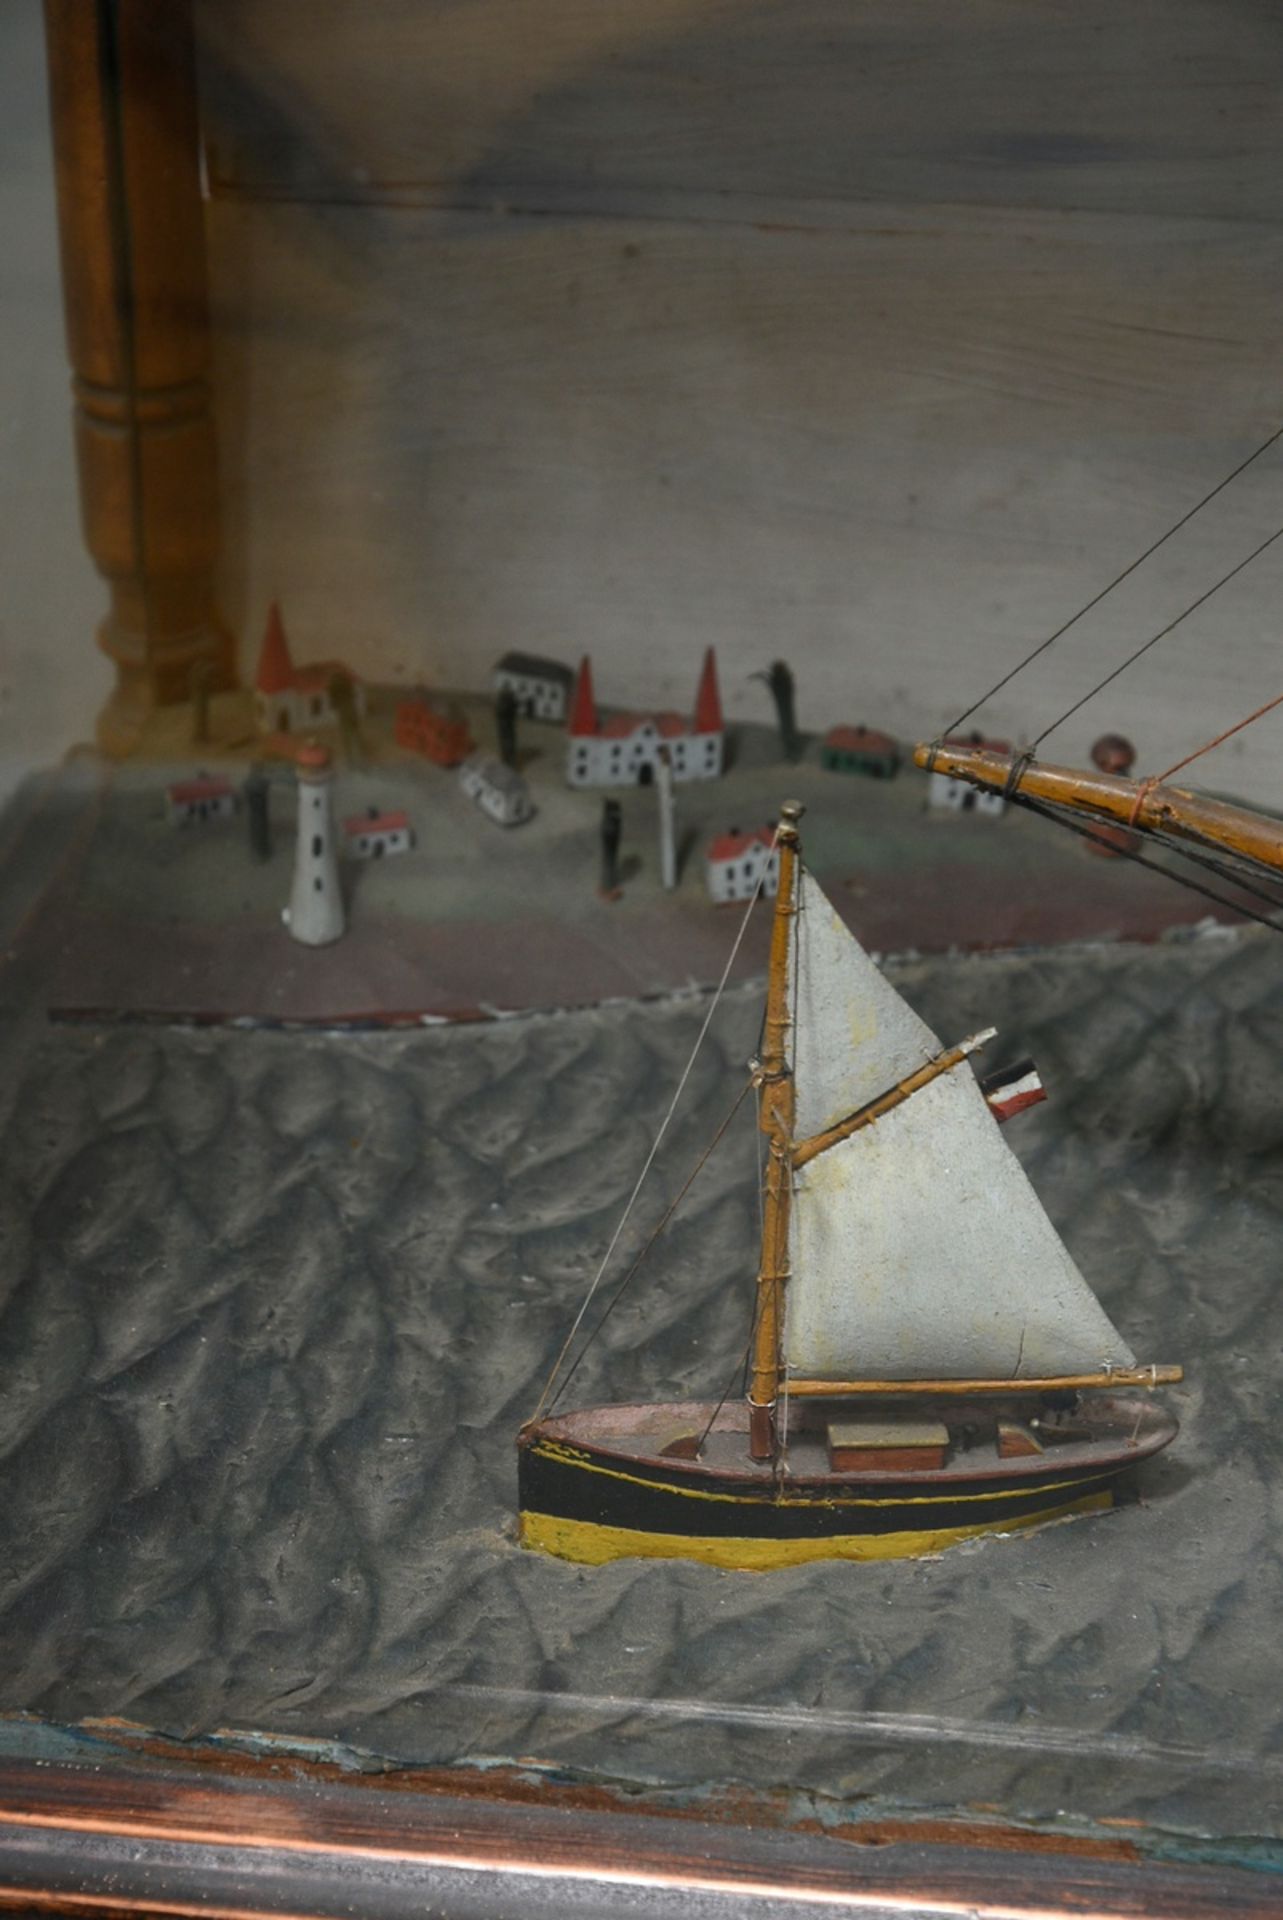 Diorama with full model of a ship "Four-masted barque 'Placilla' later 'Optima'" with dinghies in f - Image 5 of 8